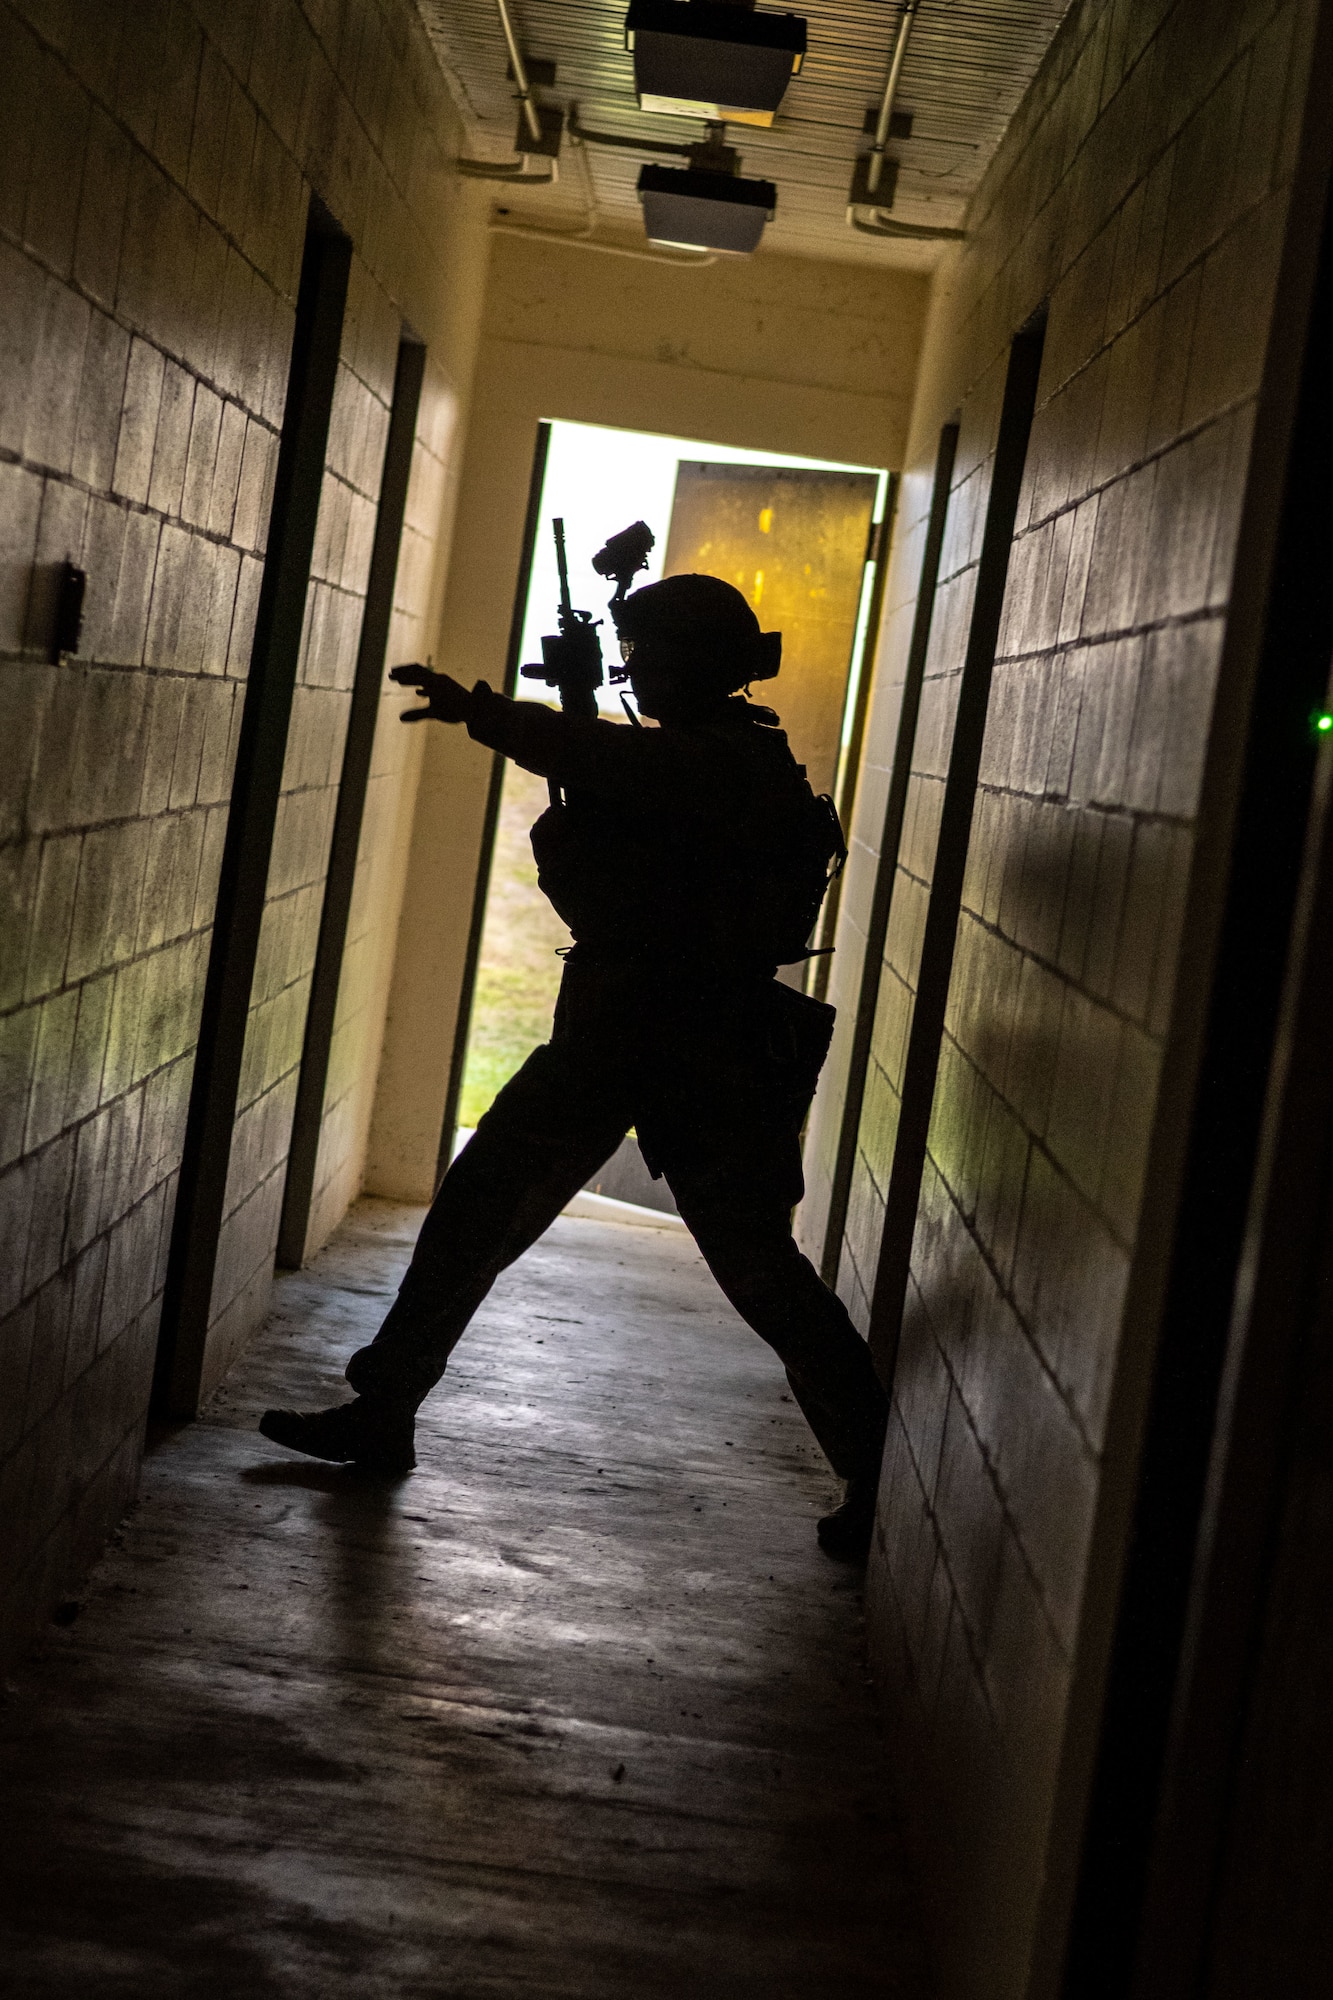 EST Airmen are highly trained and equipped to mitigate special threats which can involve barricaded suspects, hostages and active shooters. (U.S. Air Force photo by Airman 1st Class Zachary Foster)